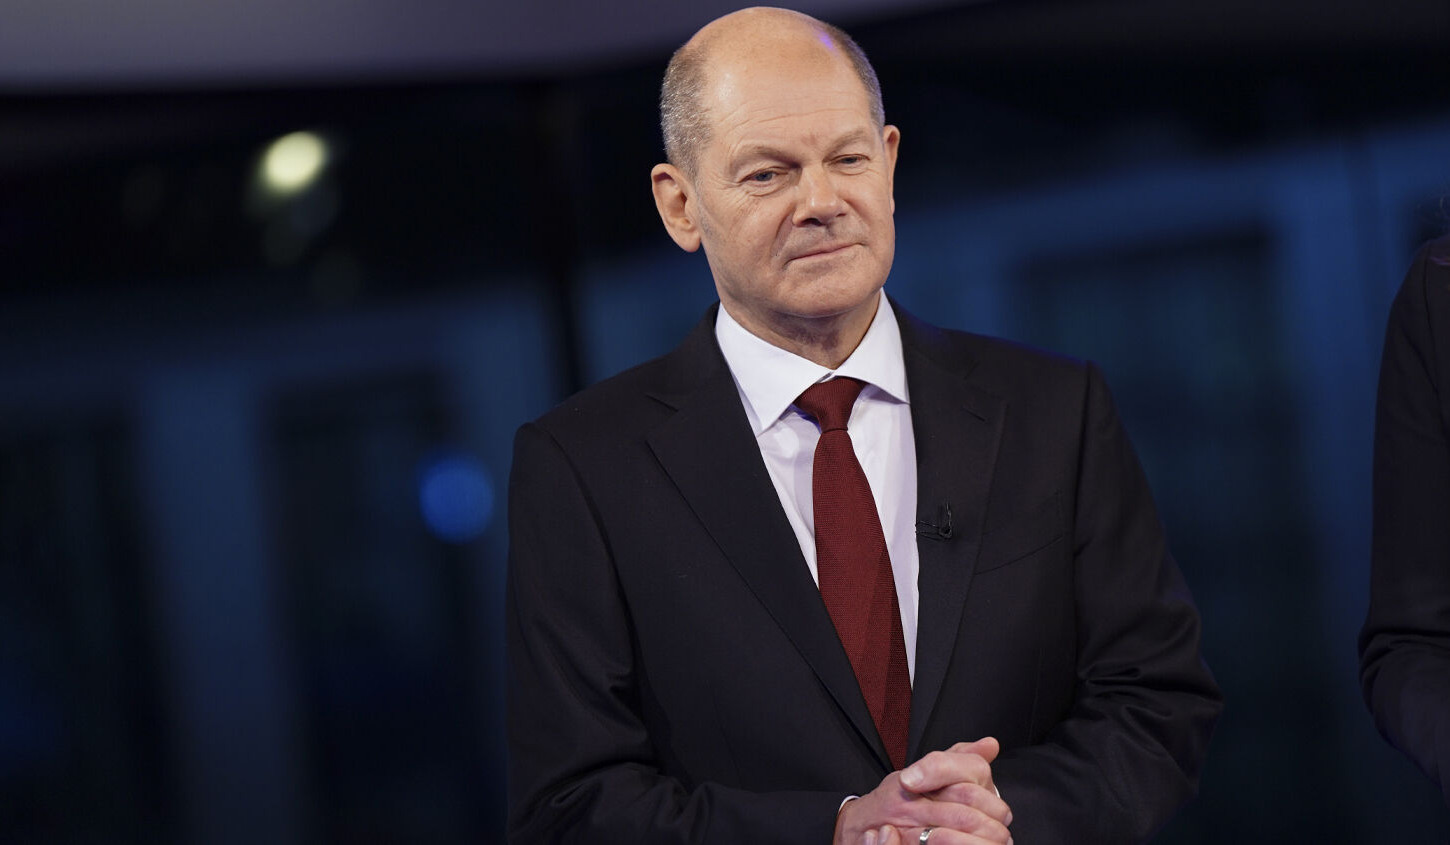 Scholz wants to place Germany-Russia dialogue under personal control